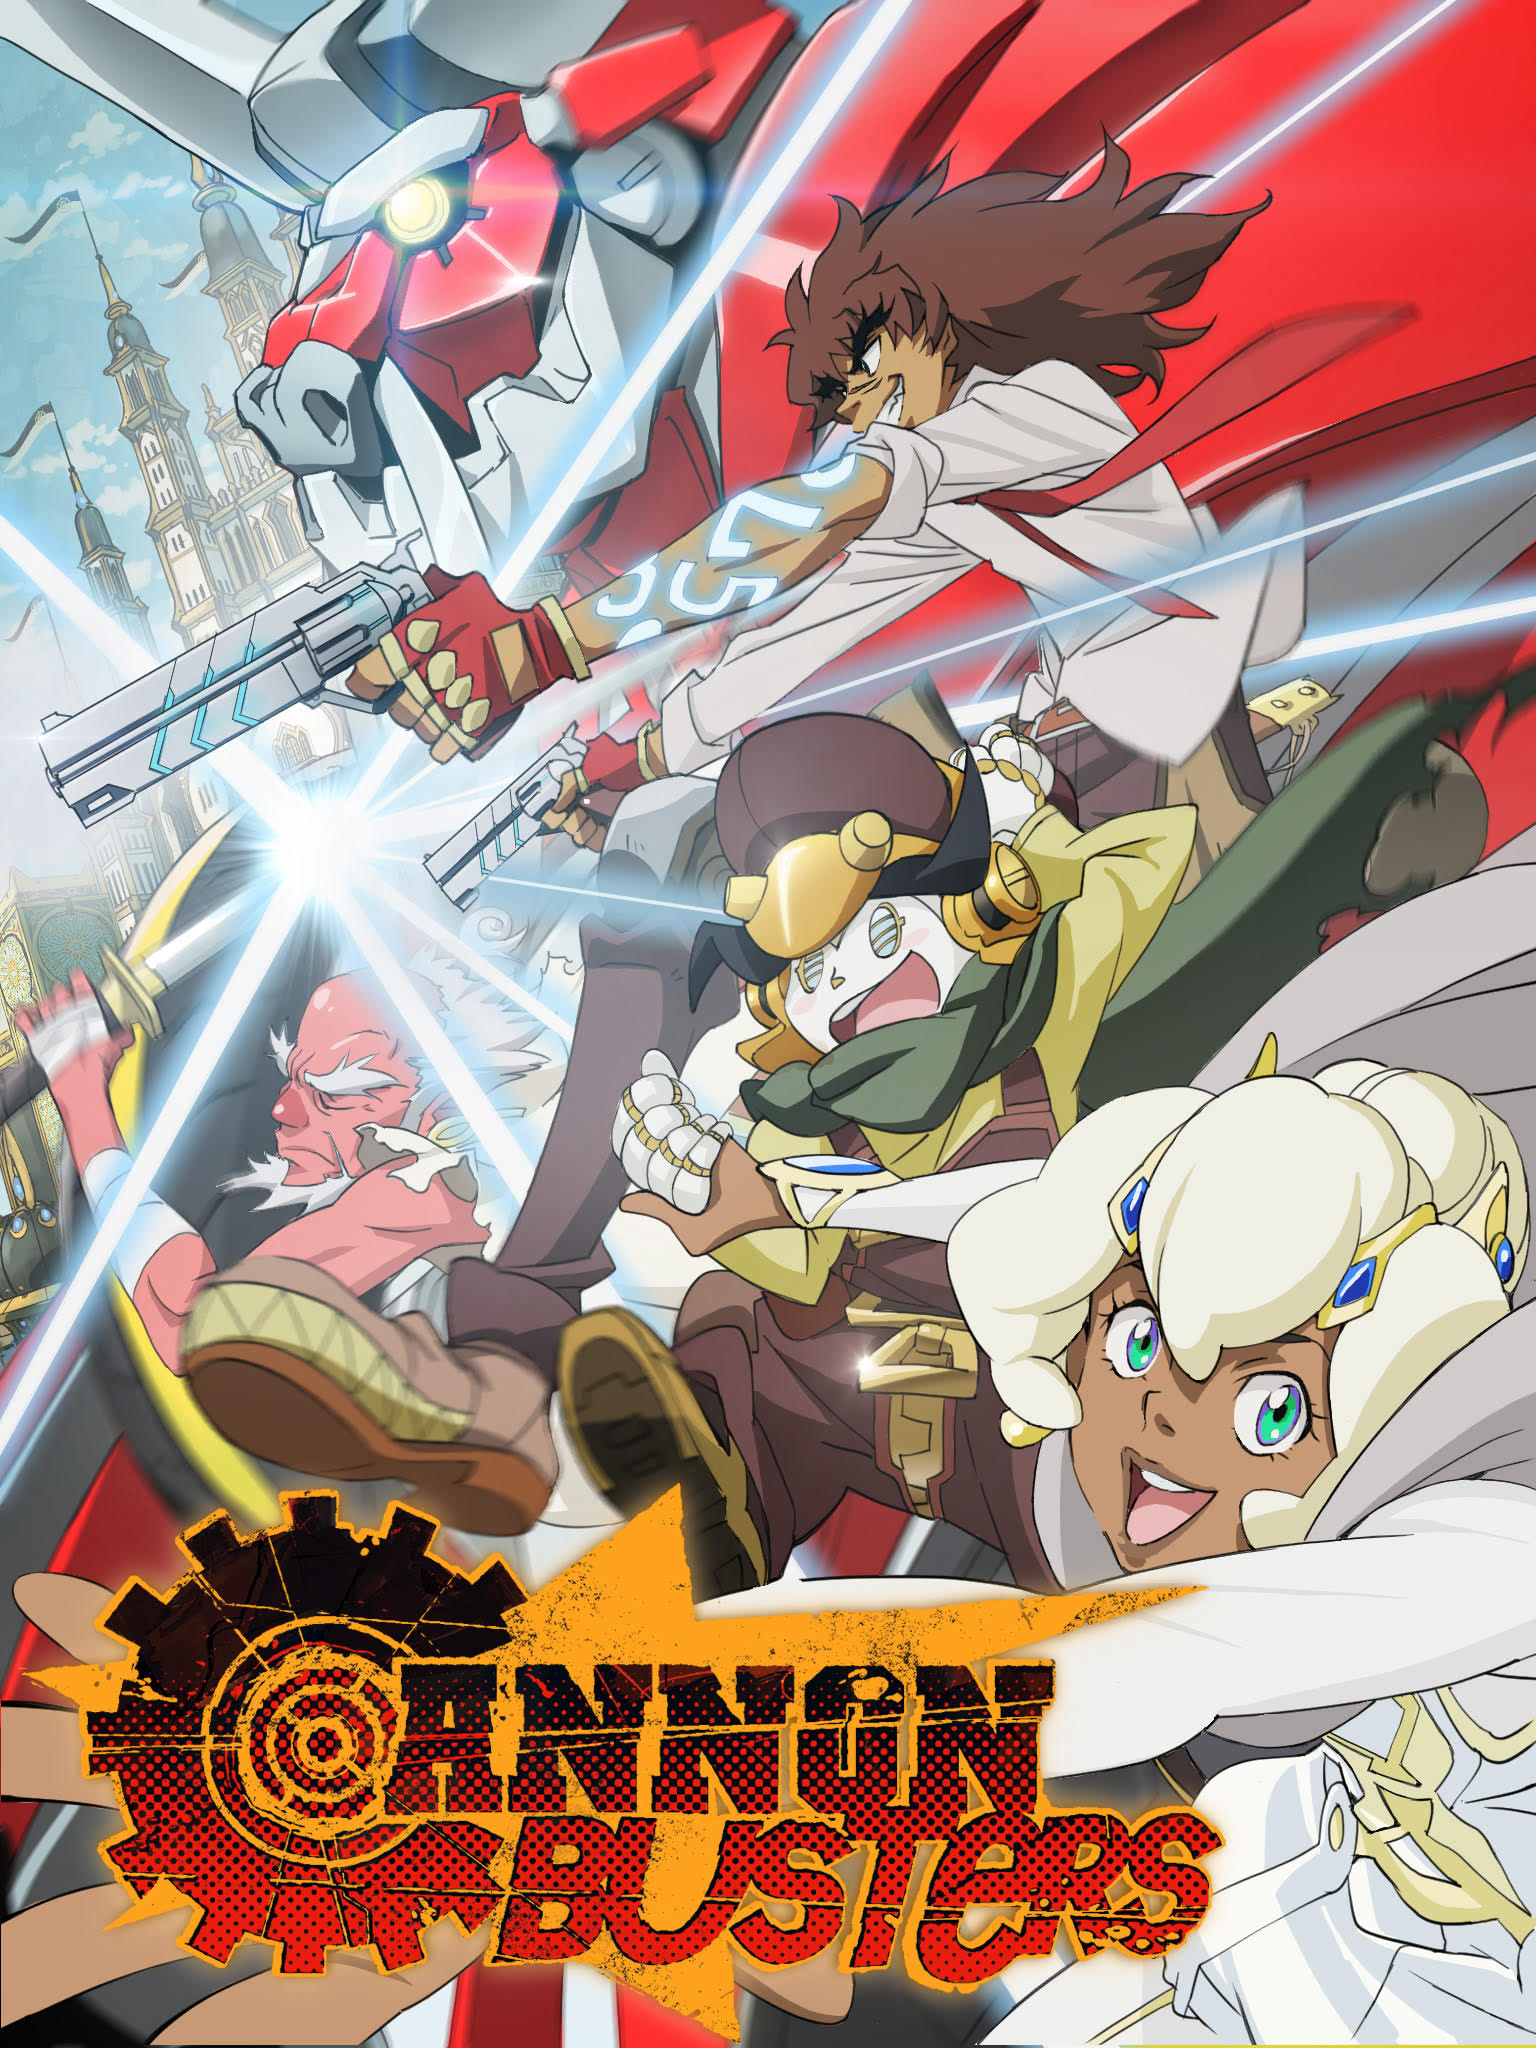 Xem Phim Cannon Busters: Khắc tinh đại pháo (Cannon Busters)